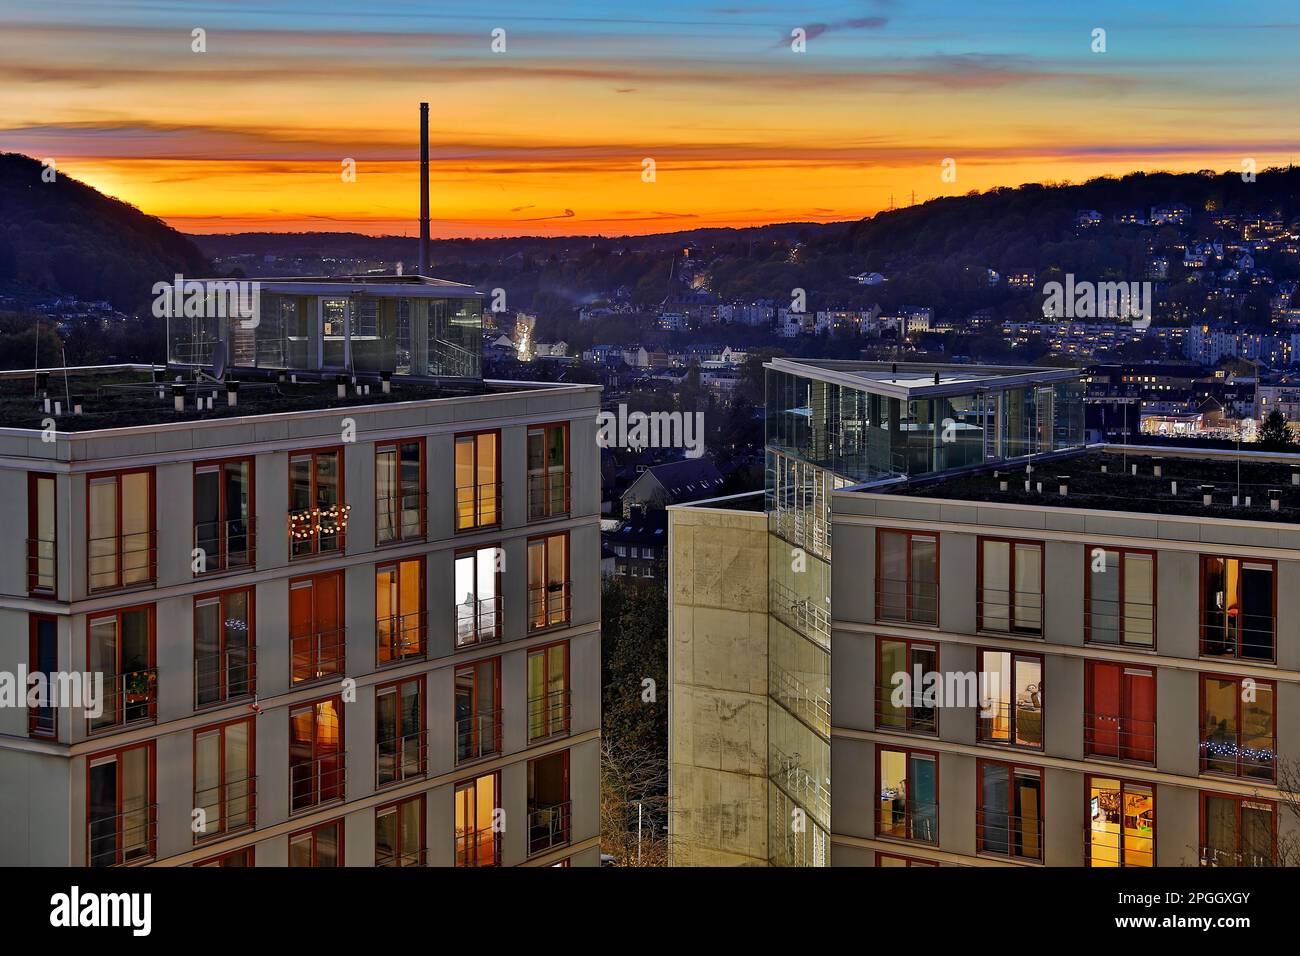 Atmospheric view of the Burse student dormitory from the university at sunset, Wuppertal, North Rhine-Westphalia, Germany Stock Photo